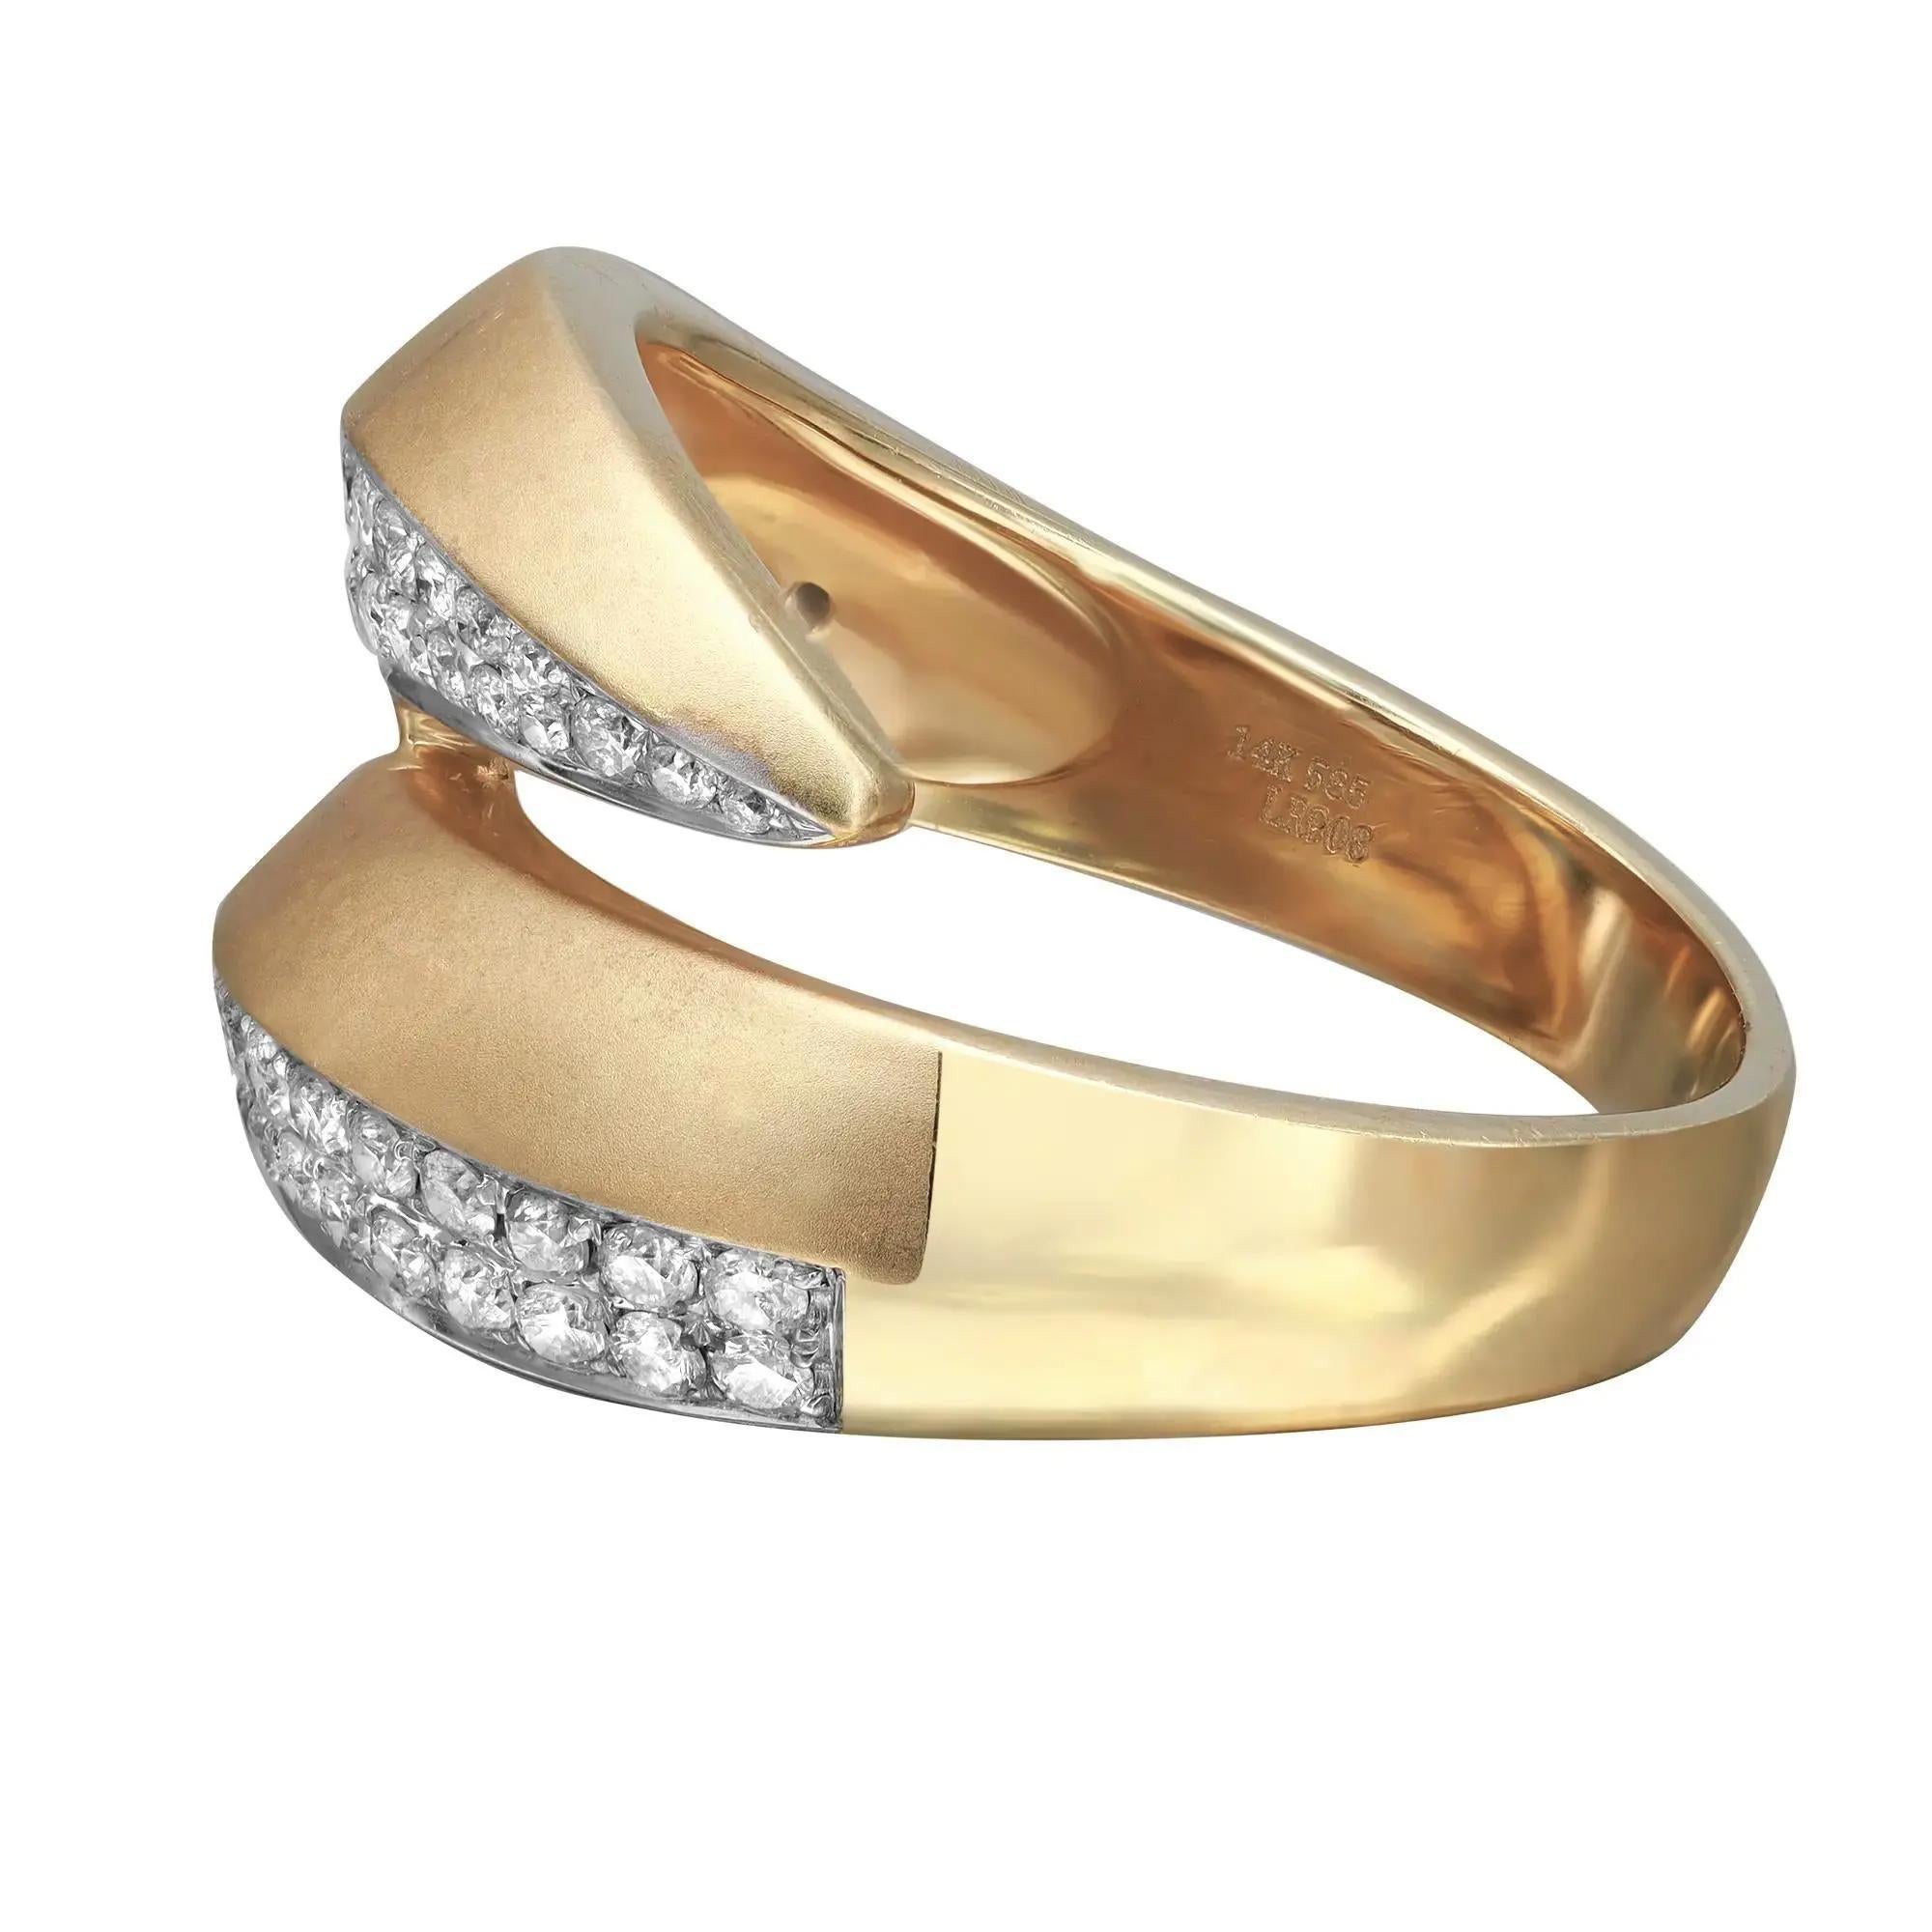 0.69cttw Pave Set Round Cut Diamond Ladies Cocktail Ring 14k Yellow Gold In New Condition For Sale In New York, NY